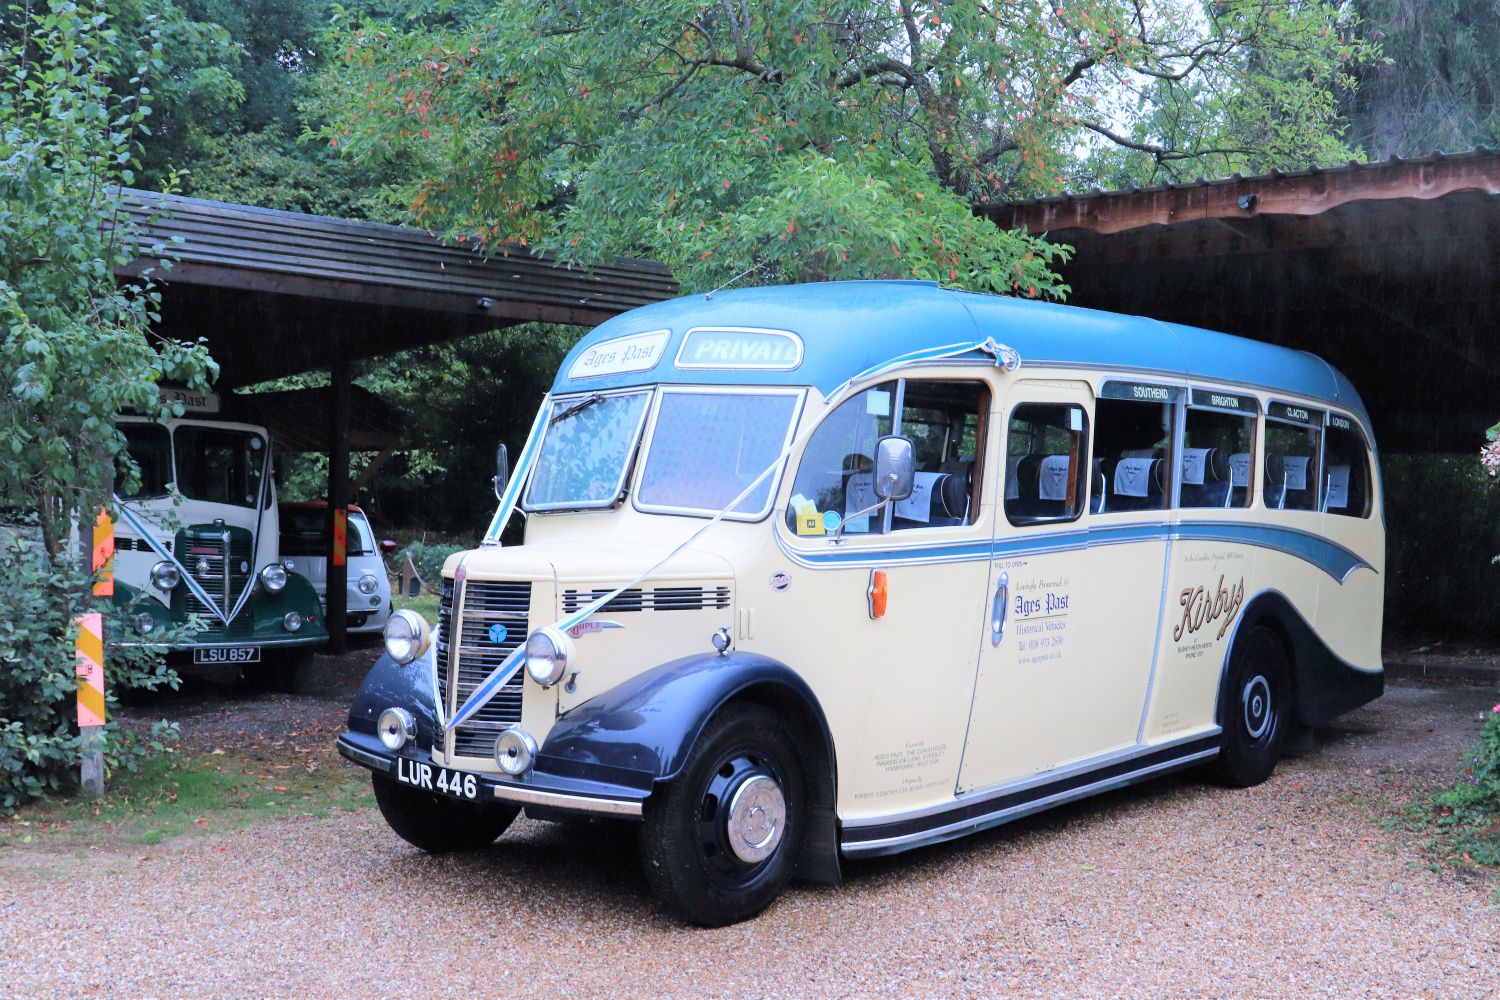 The youngest member of Ages Past’s OB fleet was delivered in September 1950 to T.H.Kirby of Bushey Heath and is presented in their colours. The last of the five Mark acquired, it is seen emerging from its garage with the Mulliner OB visible in its home to the rear